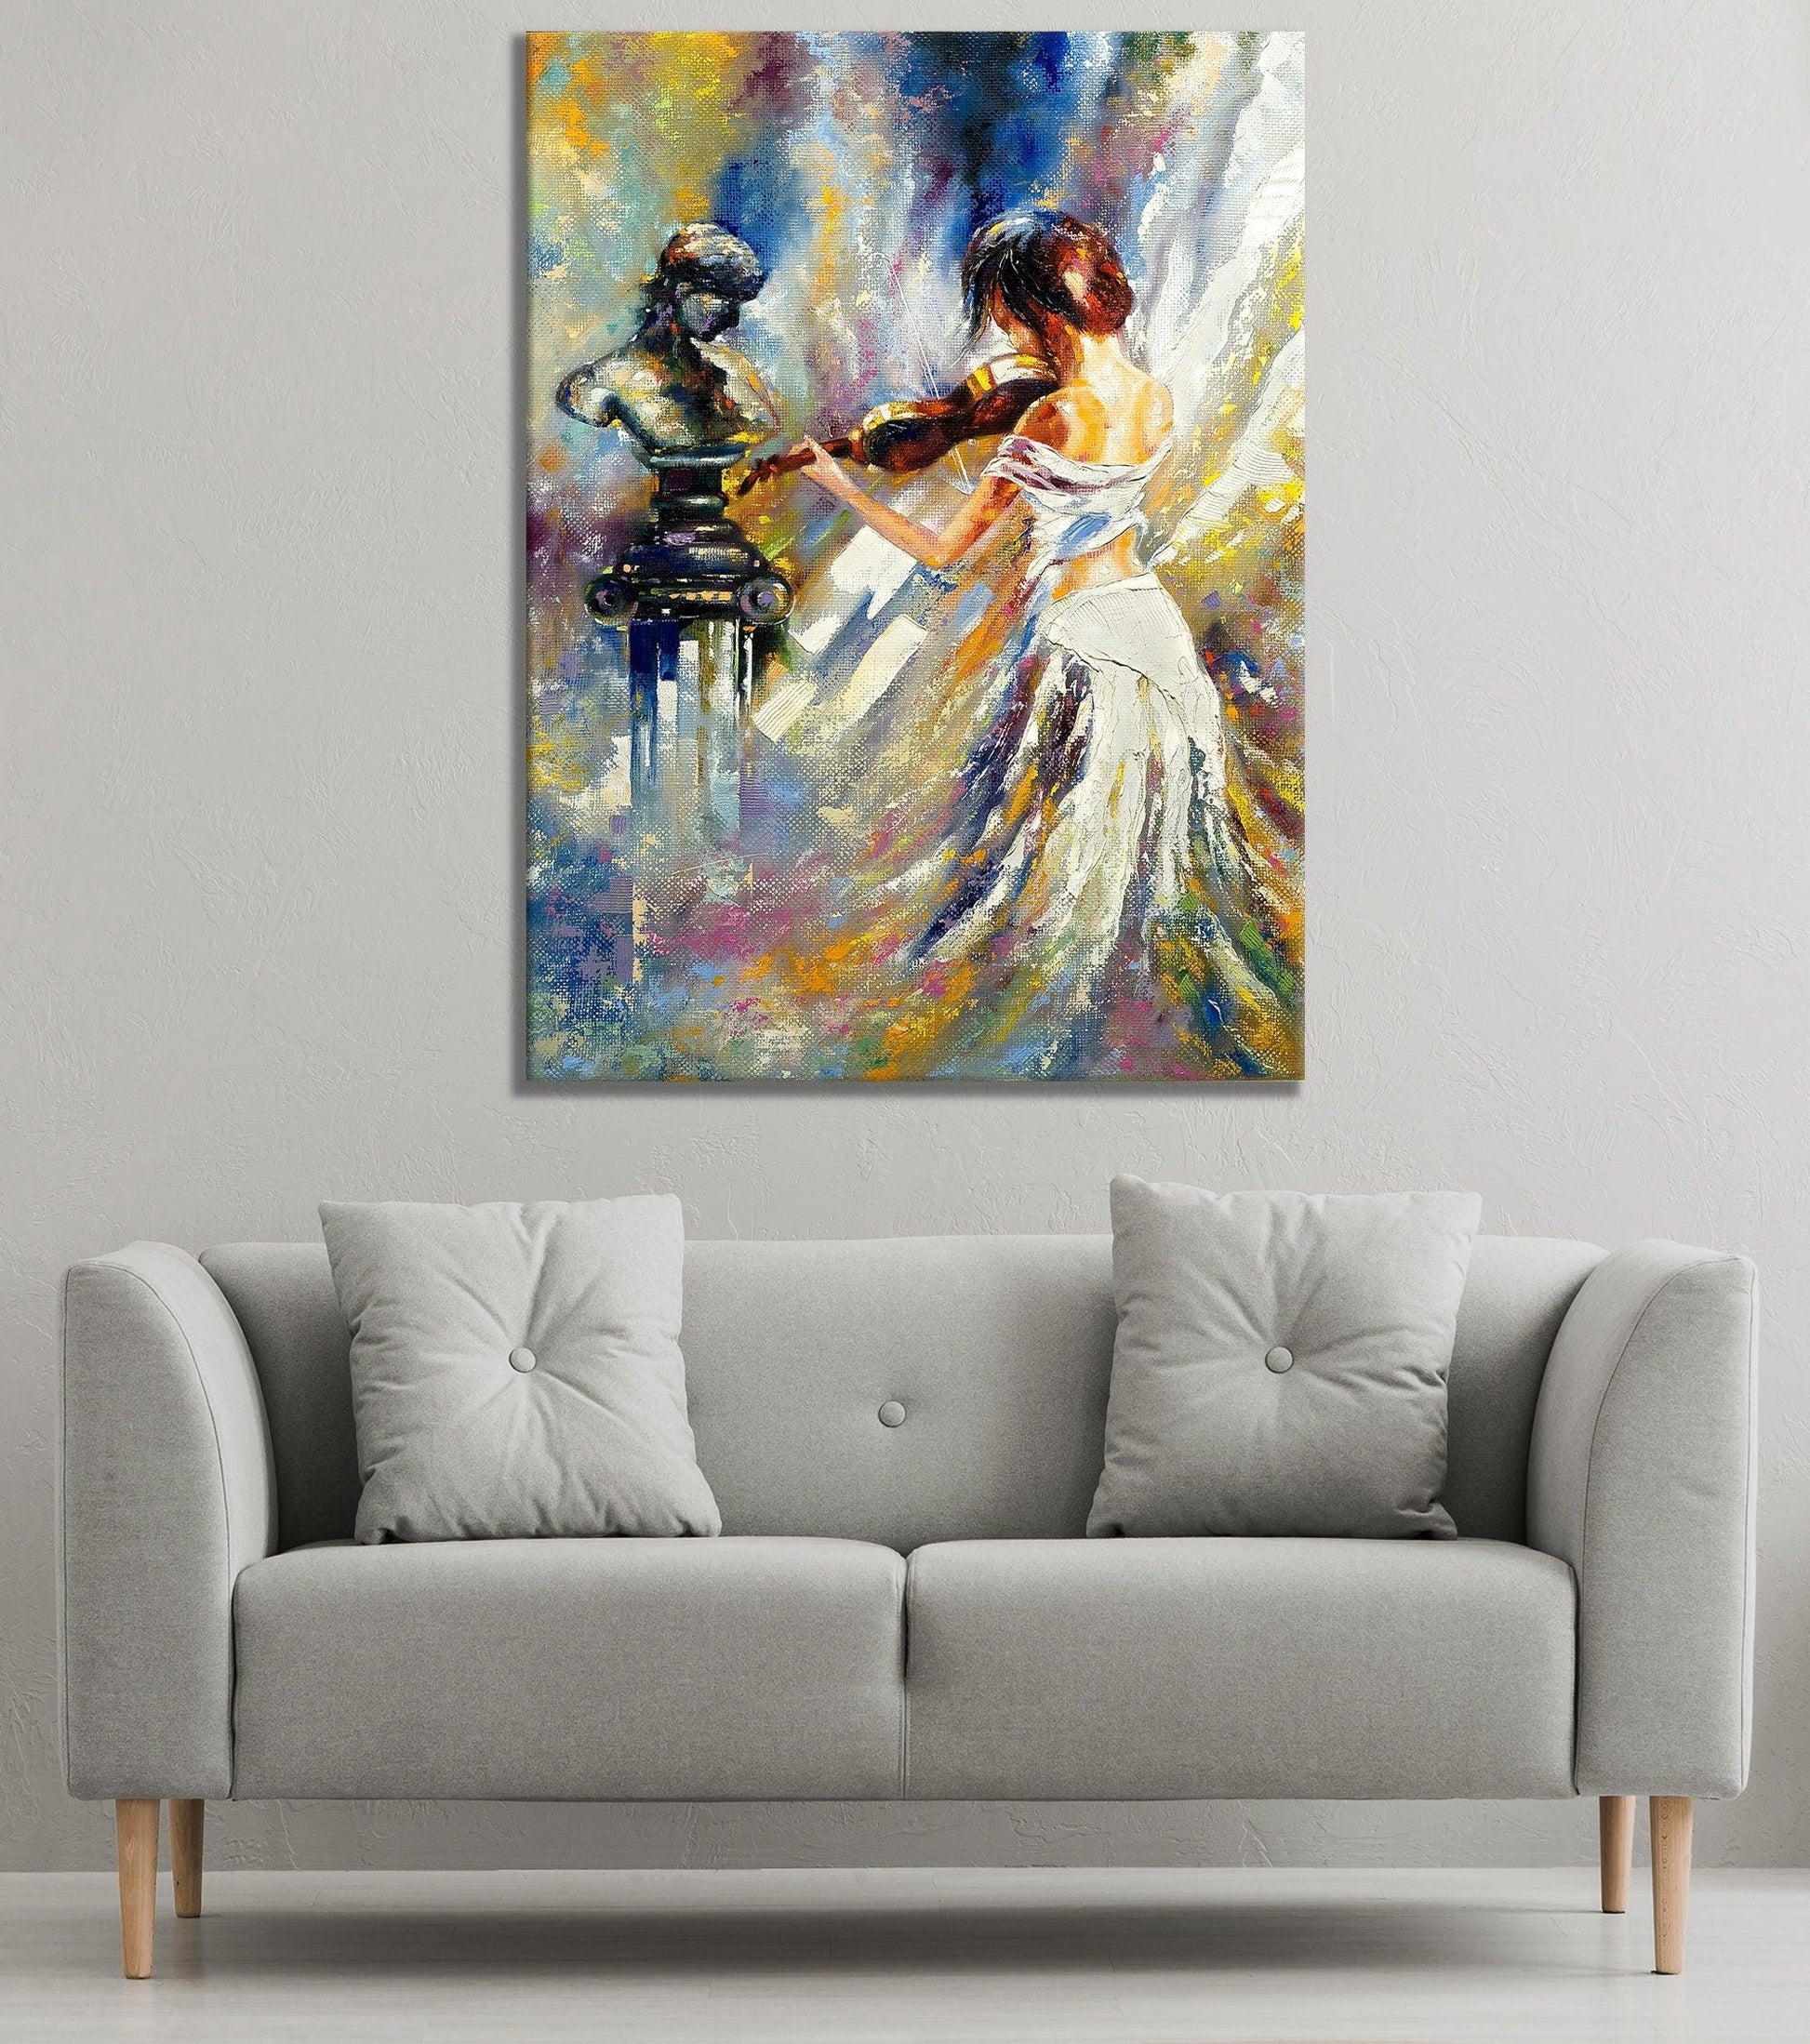 woman playing guitar canvas painting , abstract human portrait, musical instrument home decor , guitar drawing canvas print, music wall art - TrendiArt